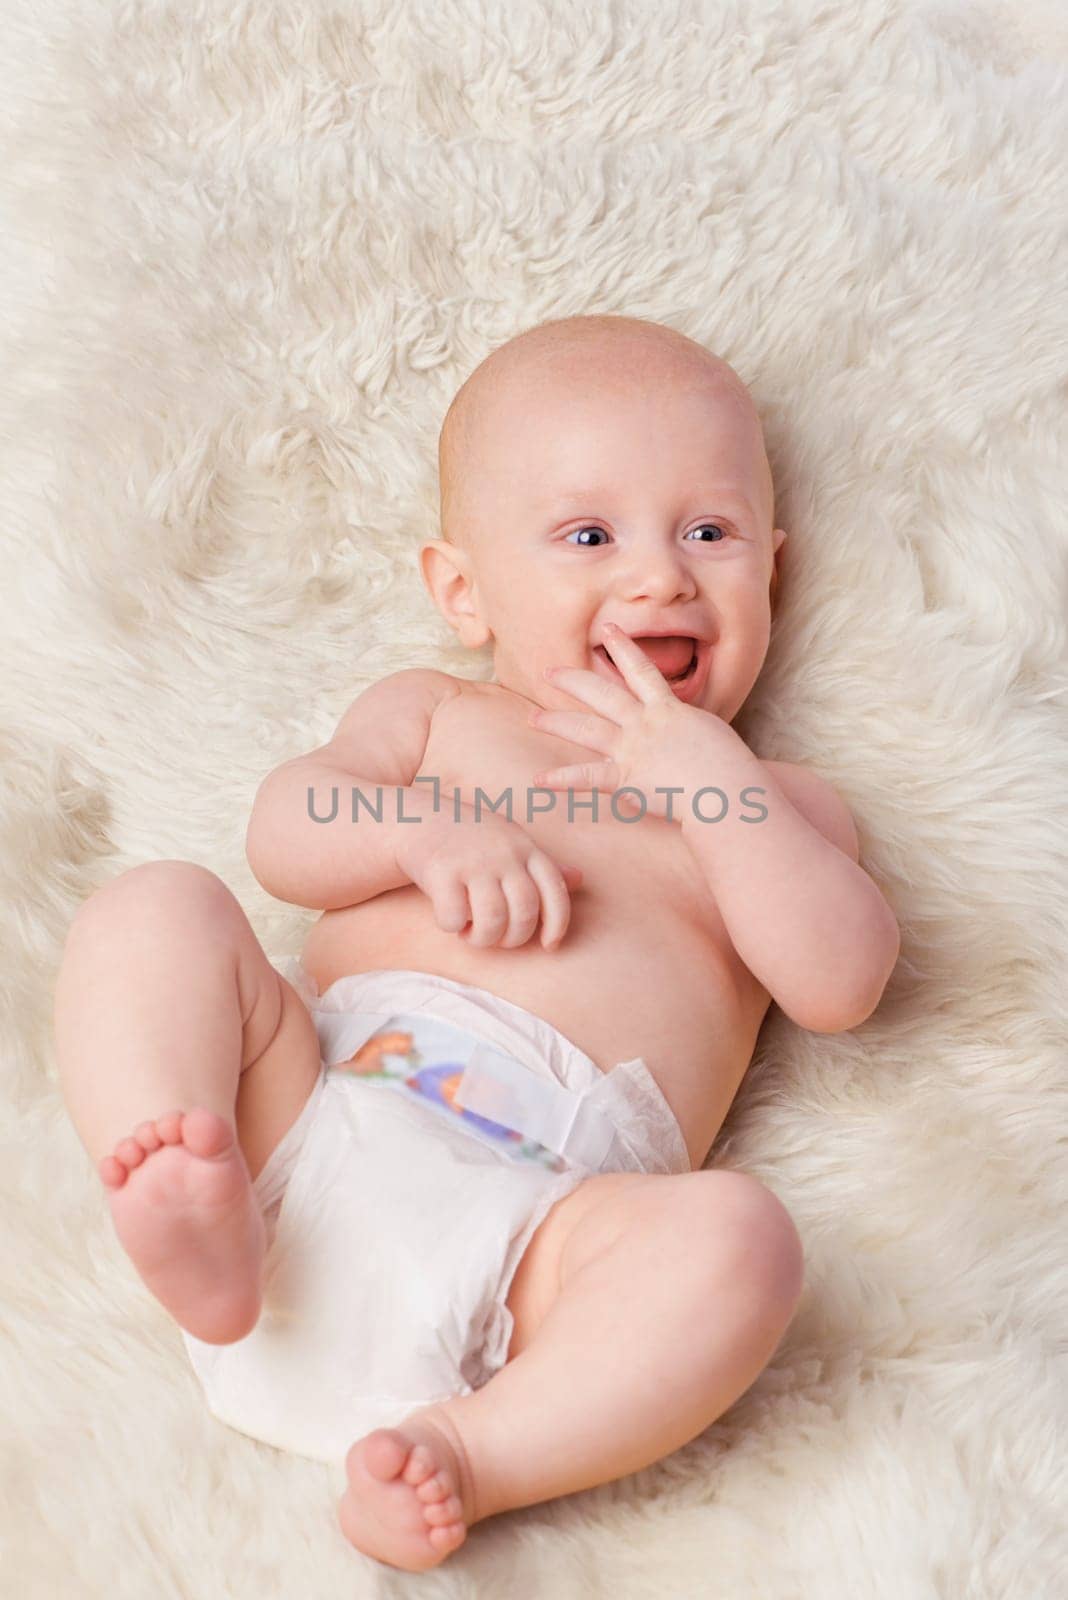 Happy baby, diaper and laugh in bedroom, furry blanket and playtime in cute for child development. Infant, kid and wellness for playing, adorable and positive on rug in house for home and toddler fun by YuriArcurs